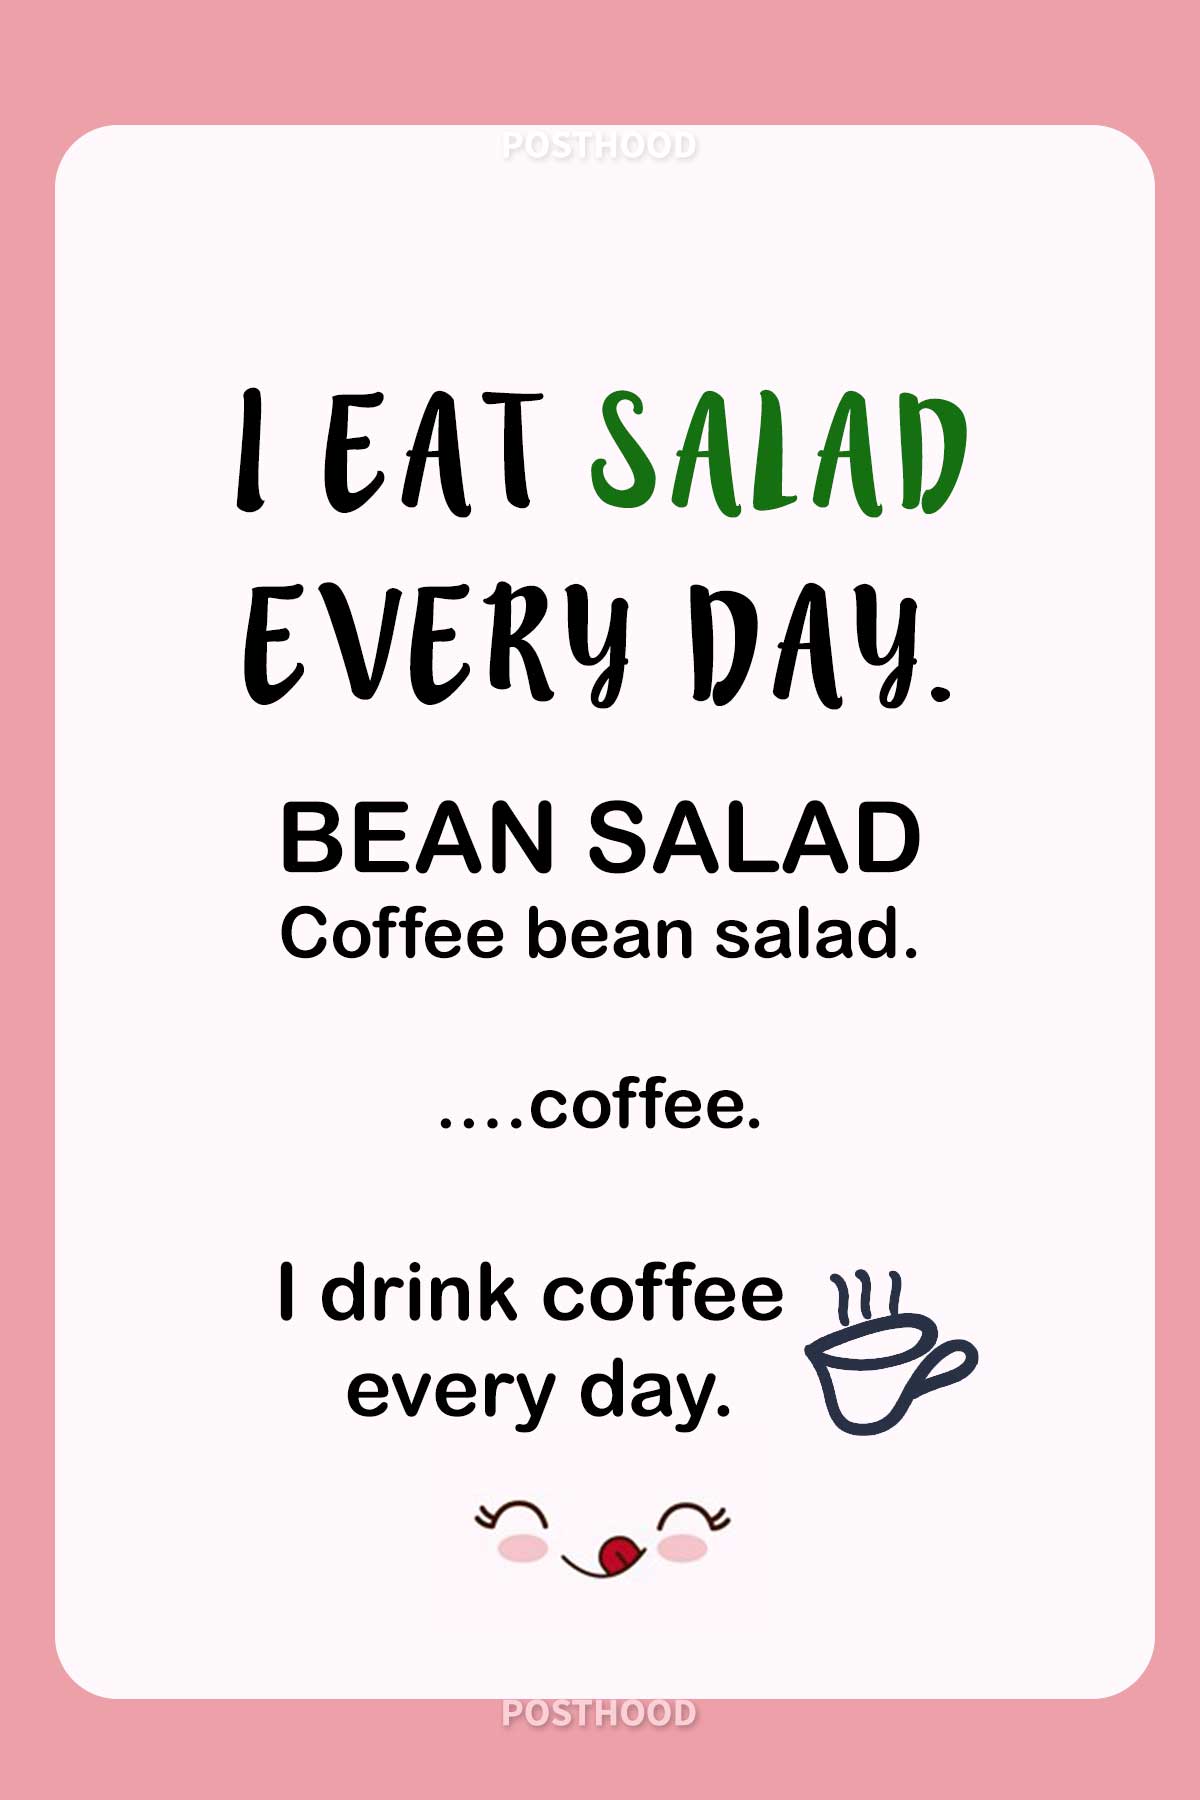 Express your caffeinated behavior with these fun and humor coffee quotes that will truly show your immense love towards coffee. Best quotes for coffee lovers.